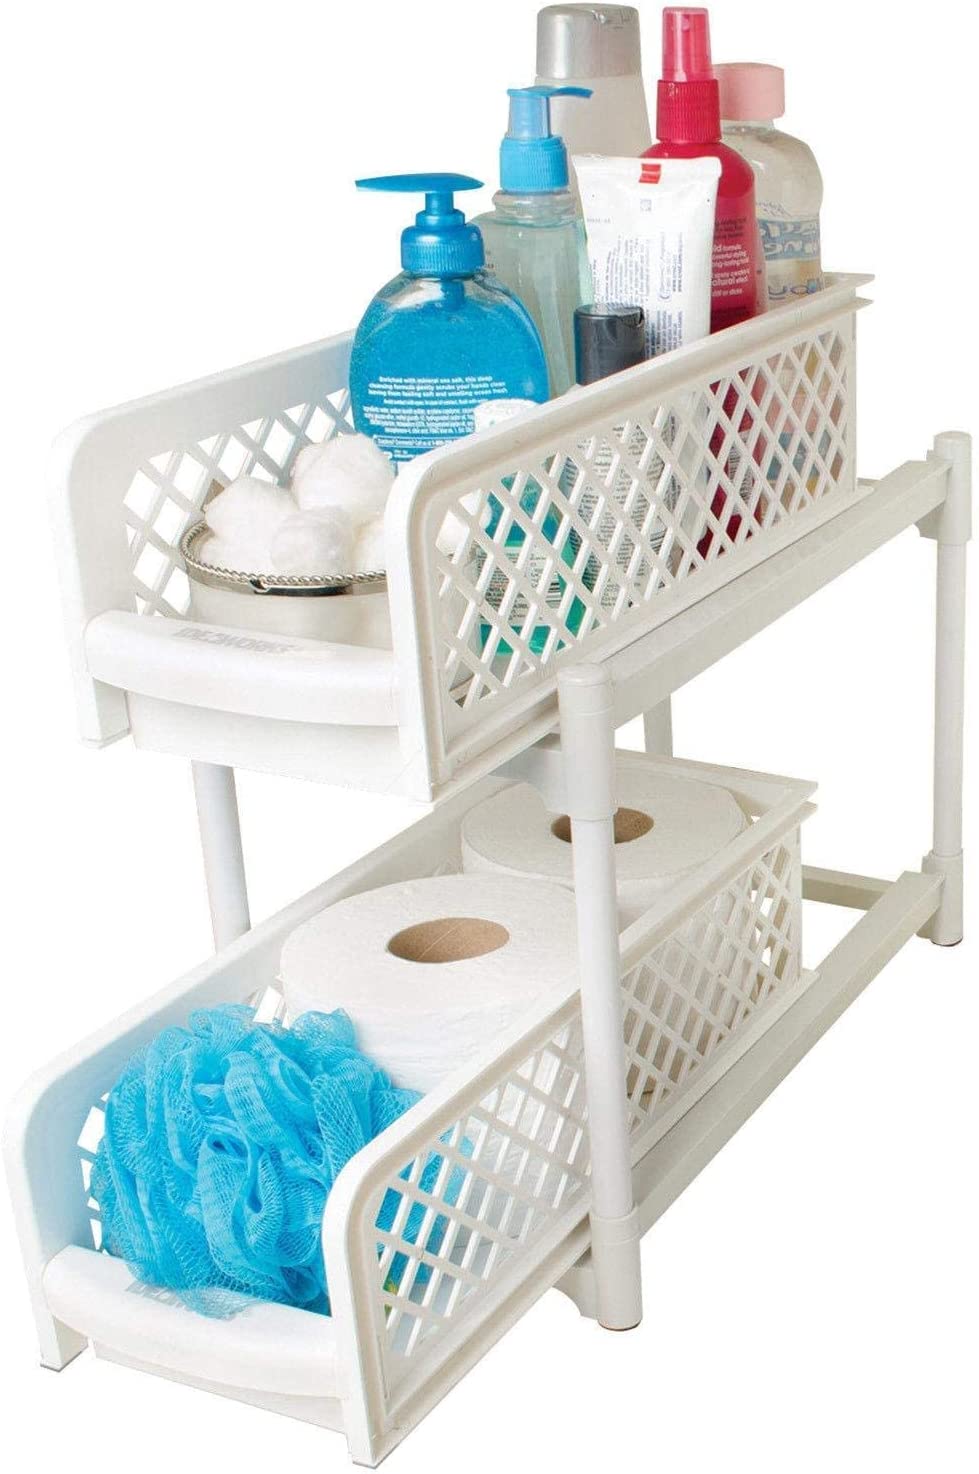 Portable Basket Drawers Bathroom Kitchen Space Saving Storage Containers